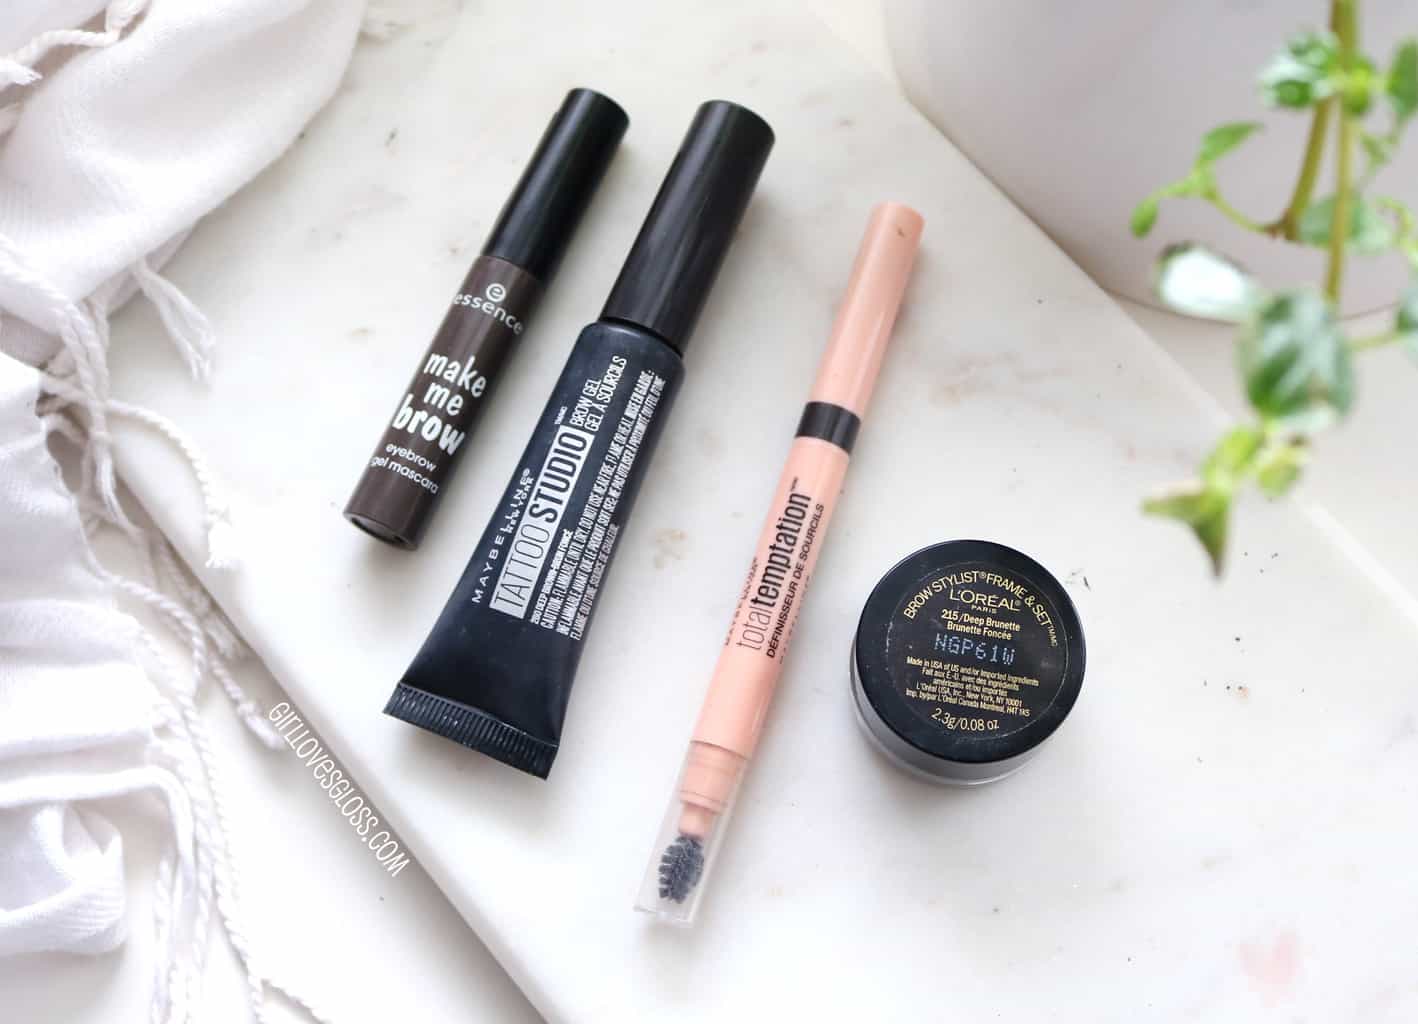 Amazing Brow Products You Can Find at the Drugstore